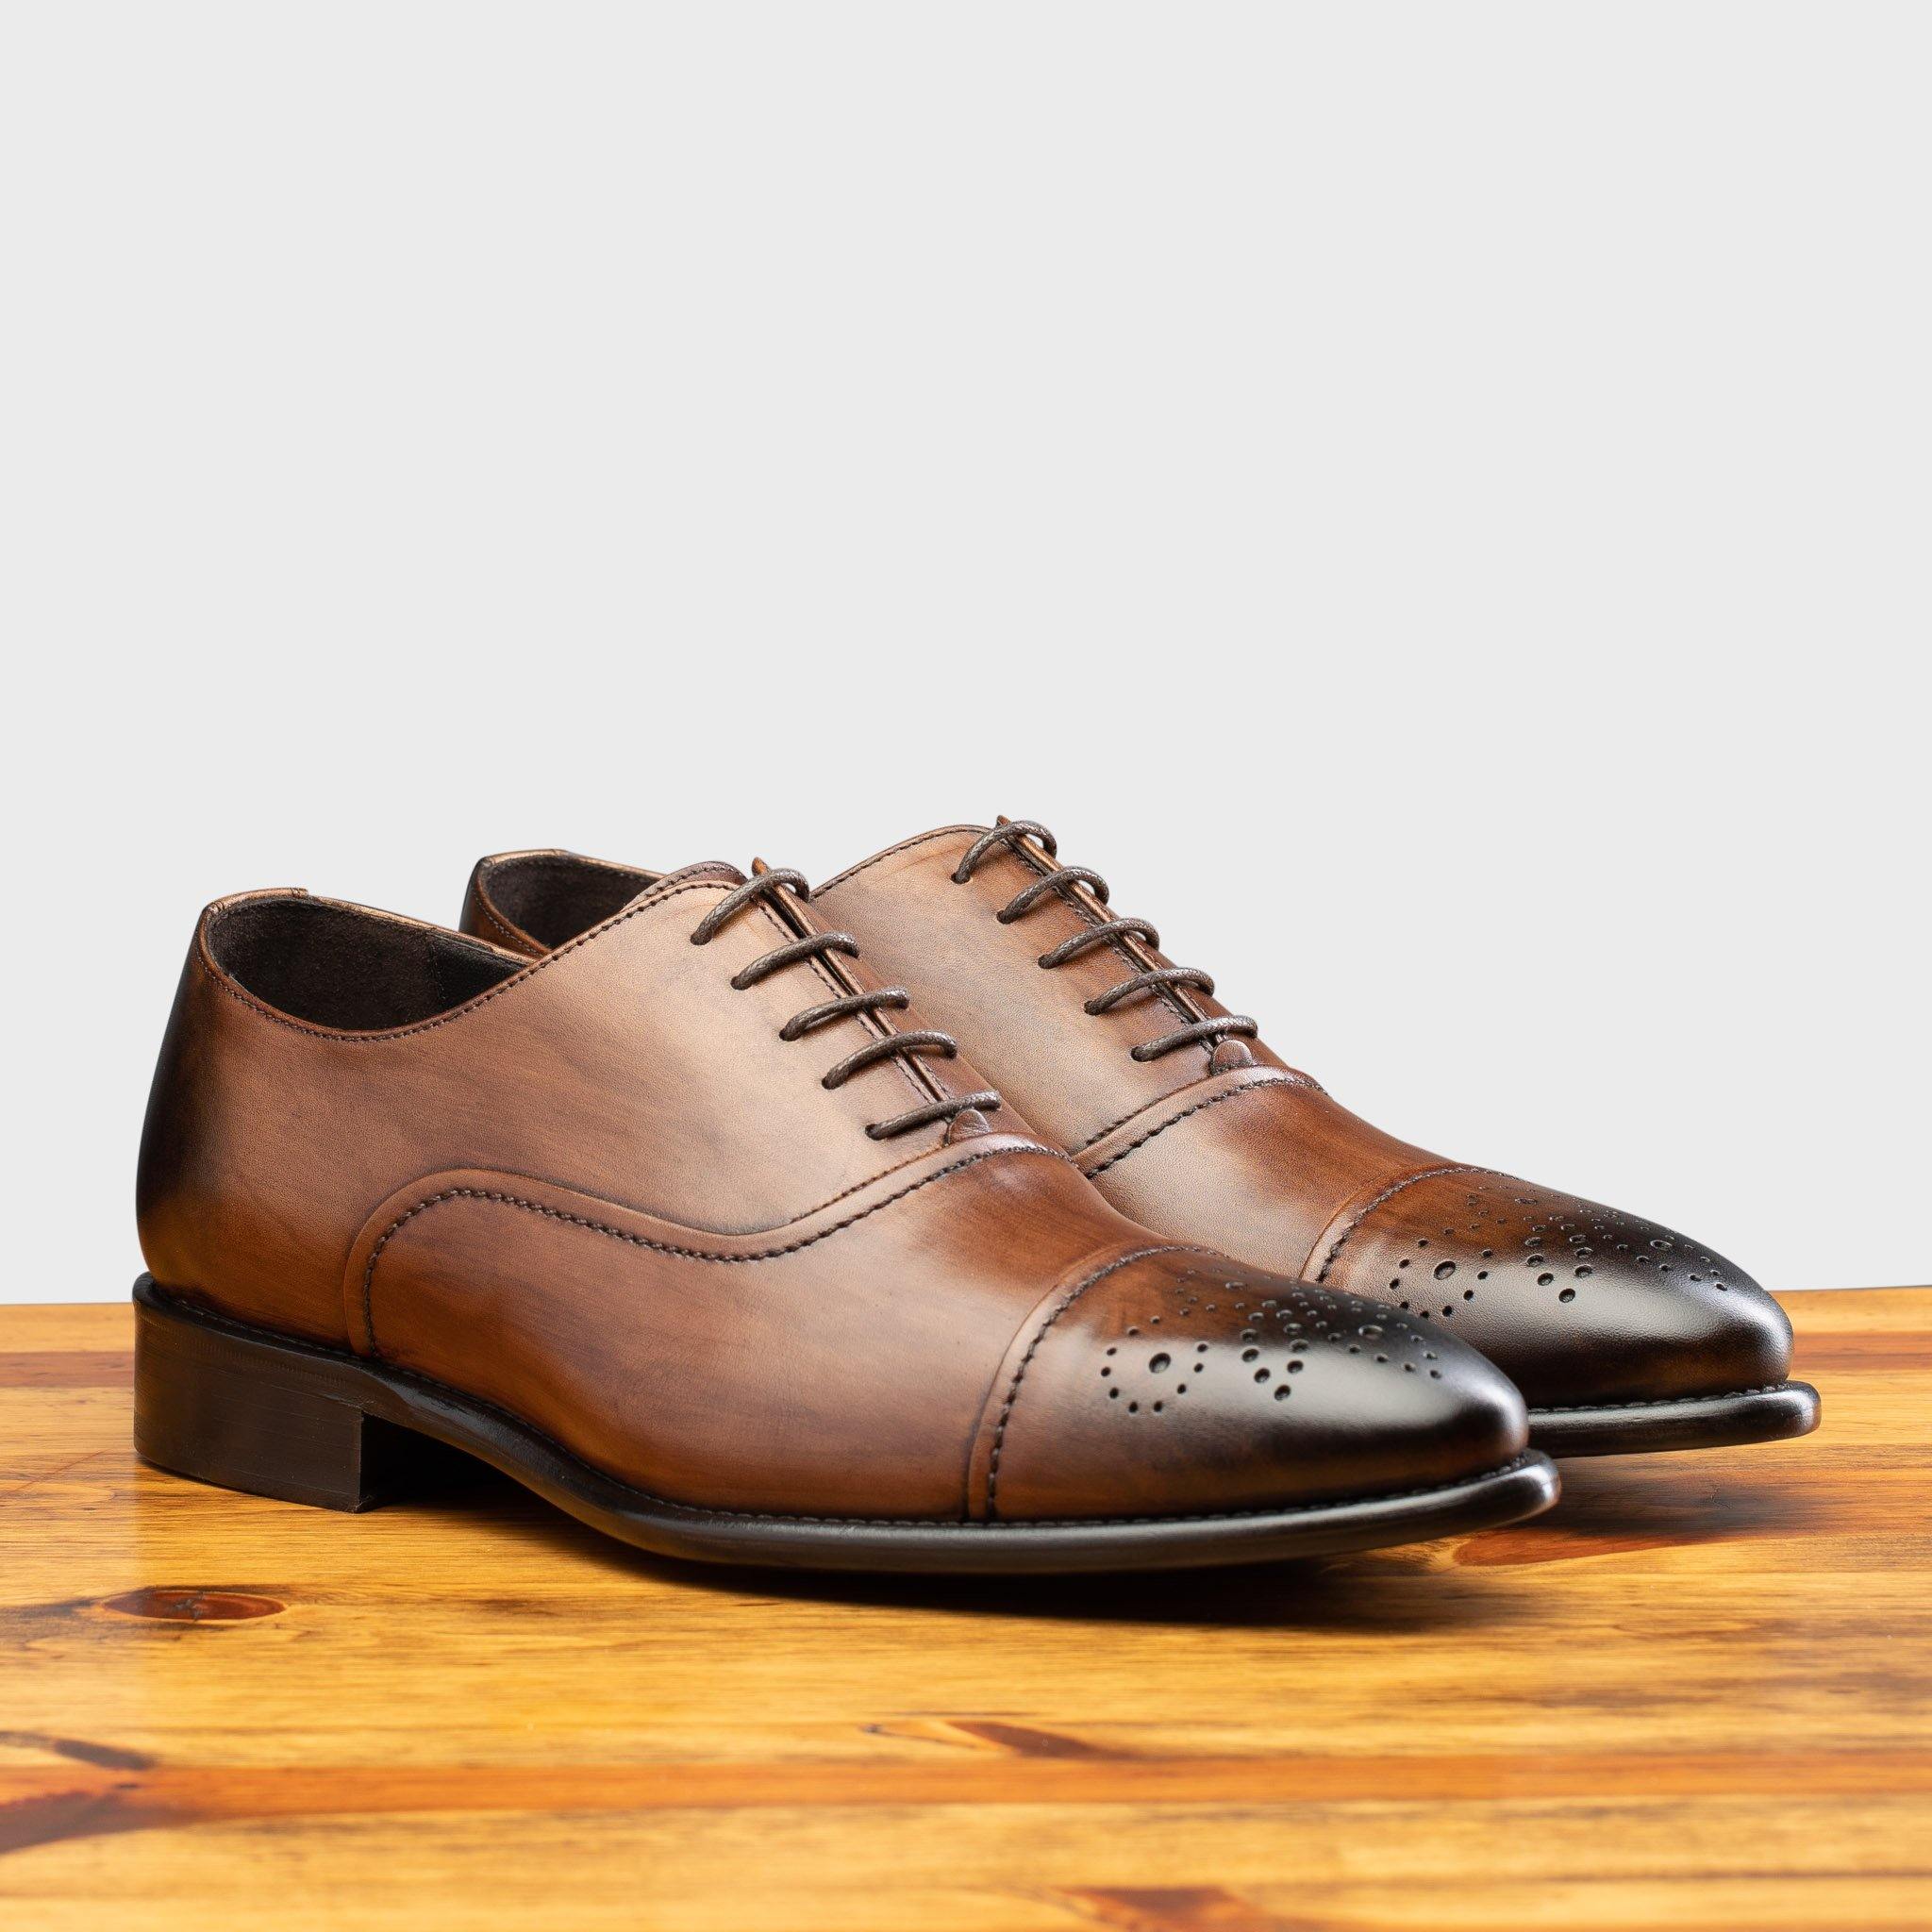 Pair of the 2361 Calzoleria Toscana Brown Cayenne Calf Cap-Toe on top of a wooden table